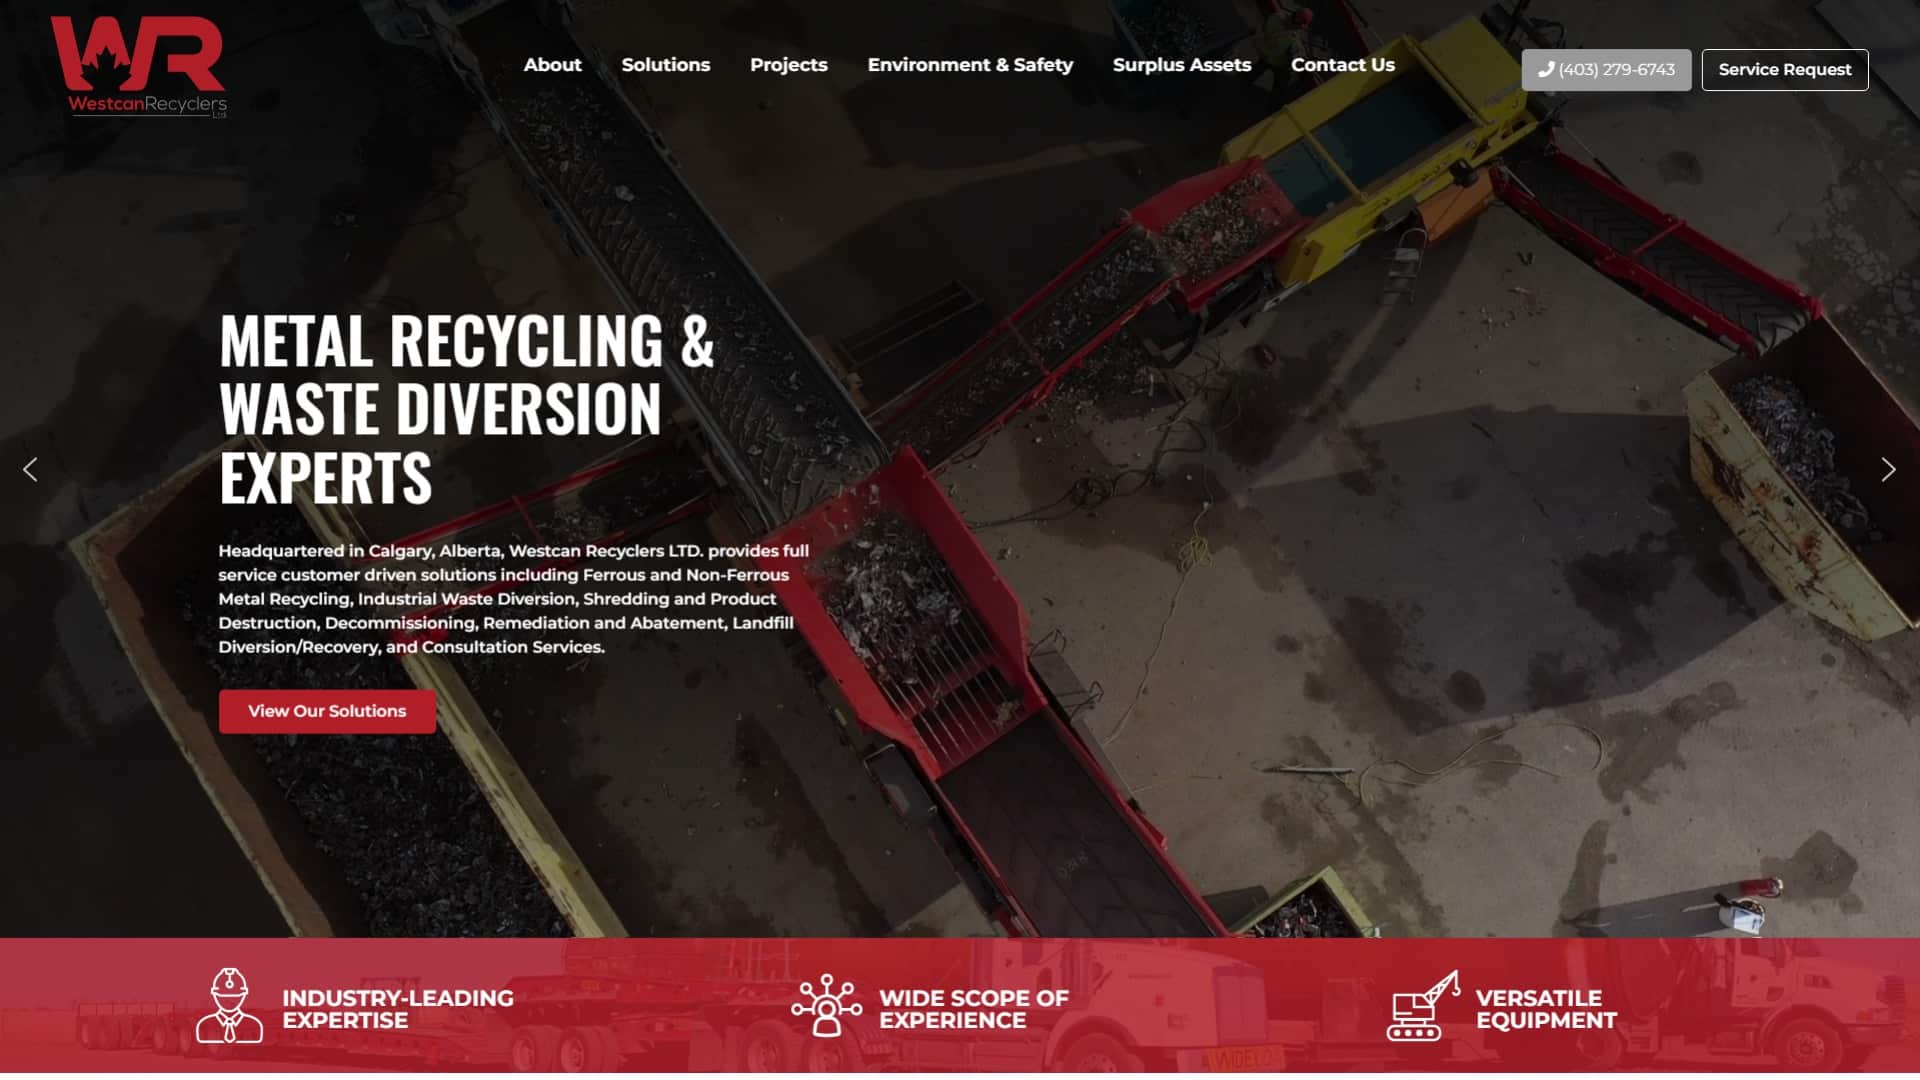 Westcan Recyclers Website Design Project